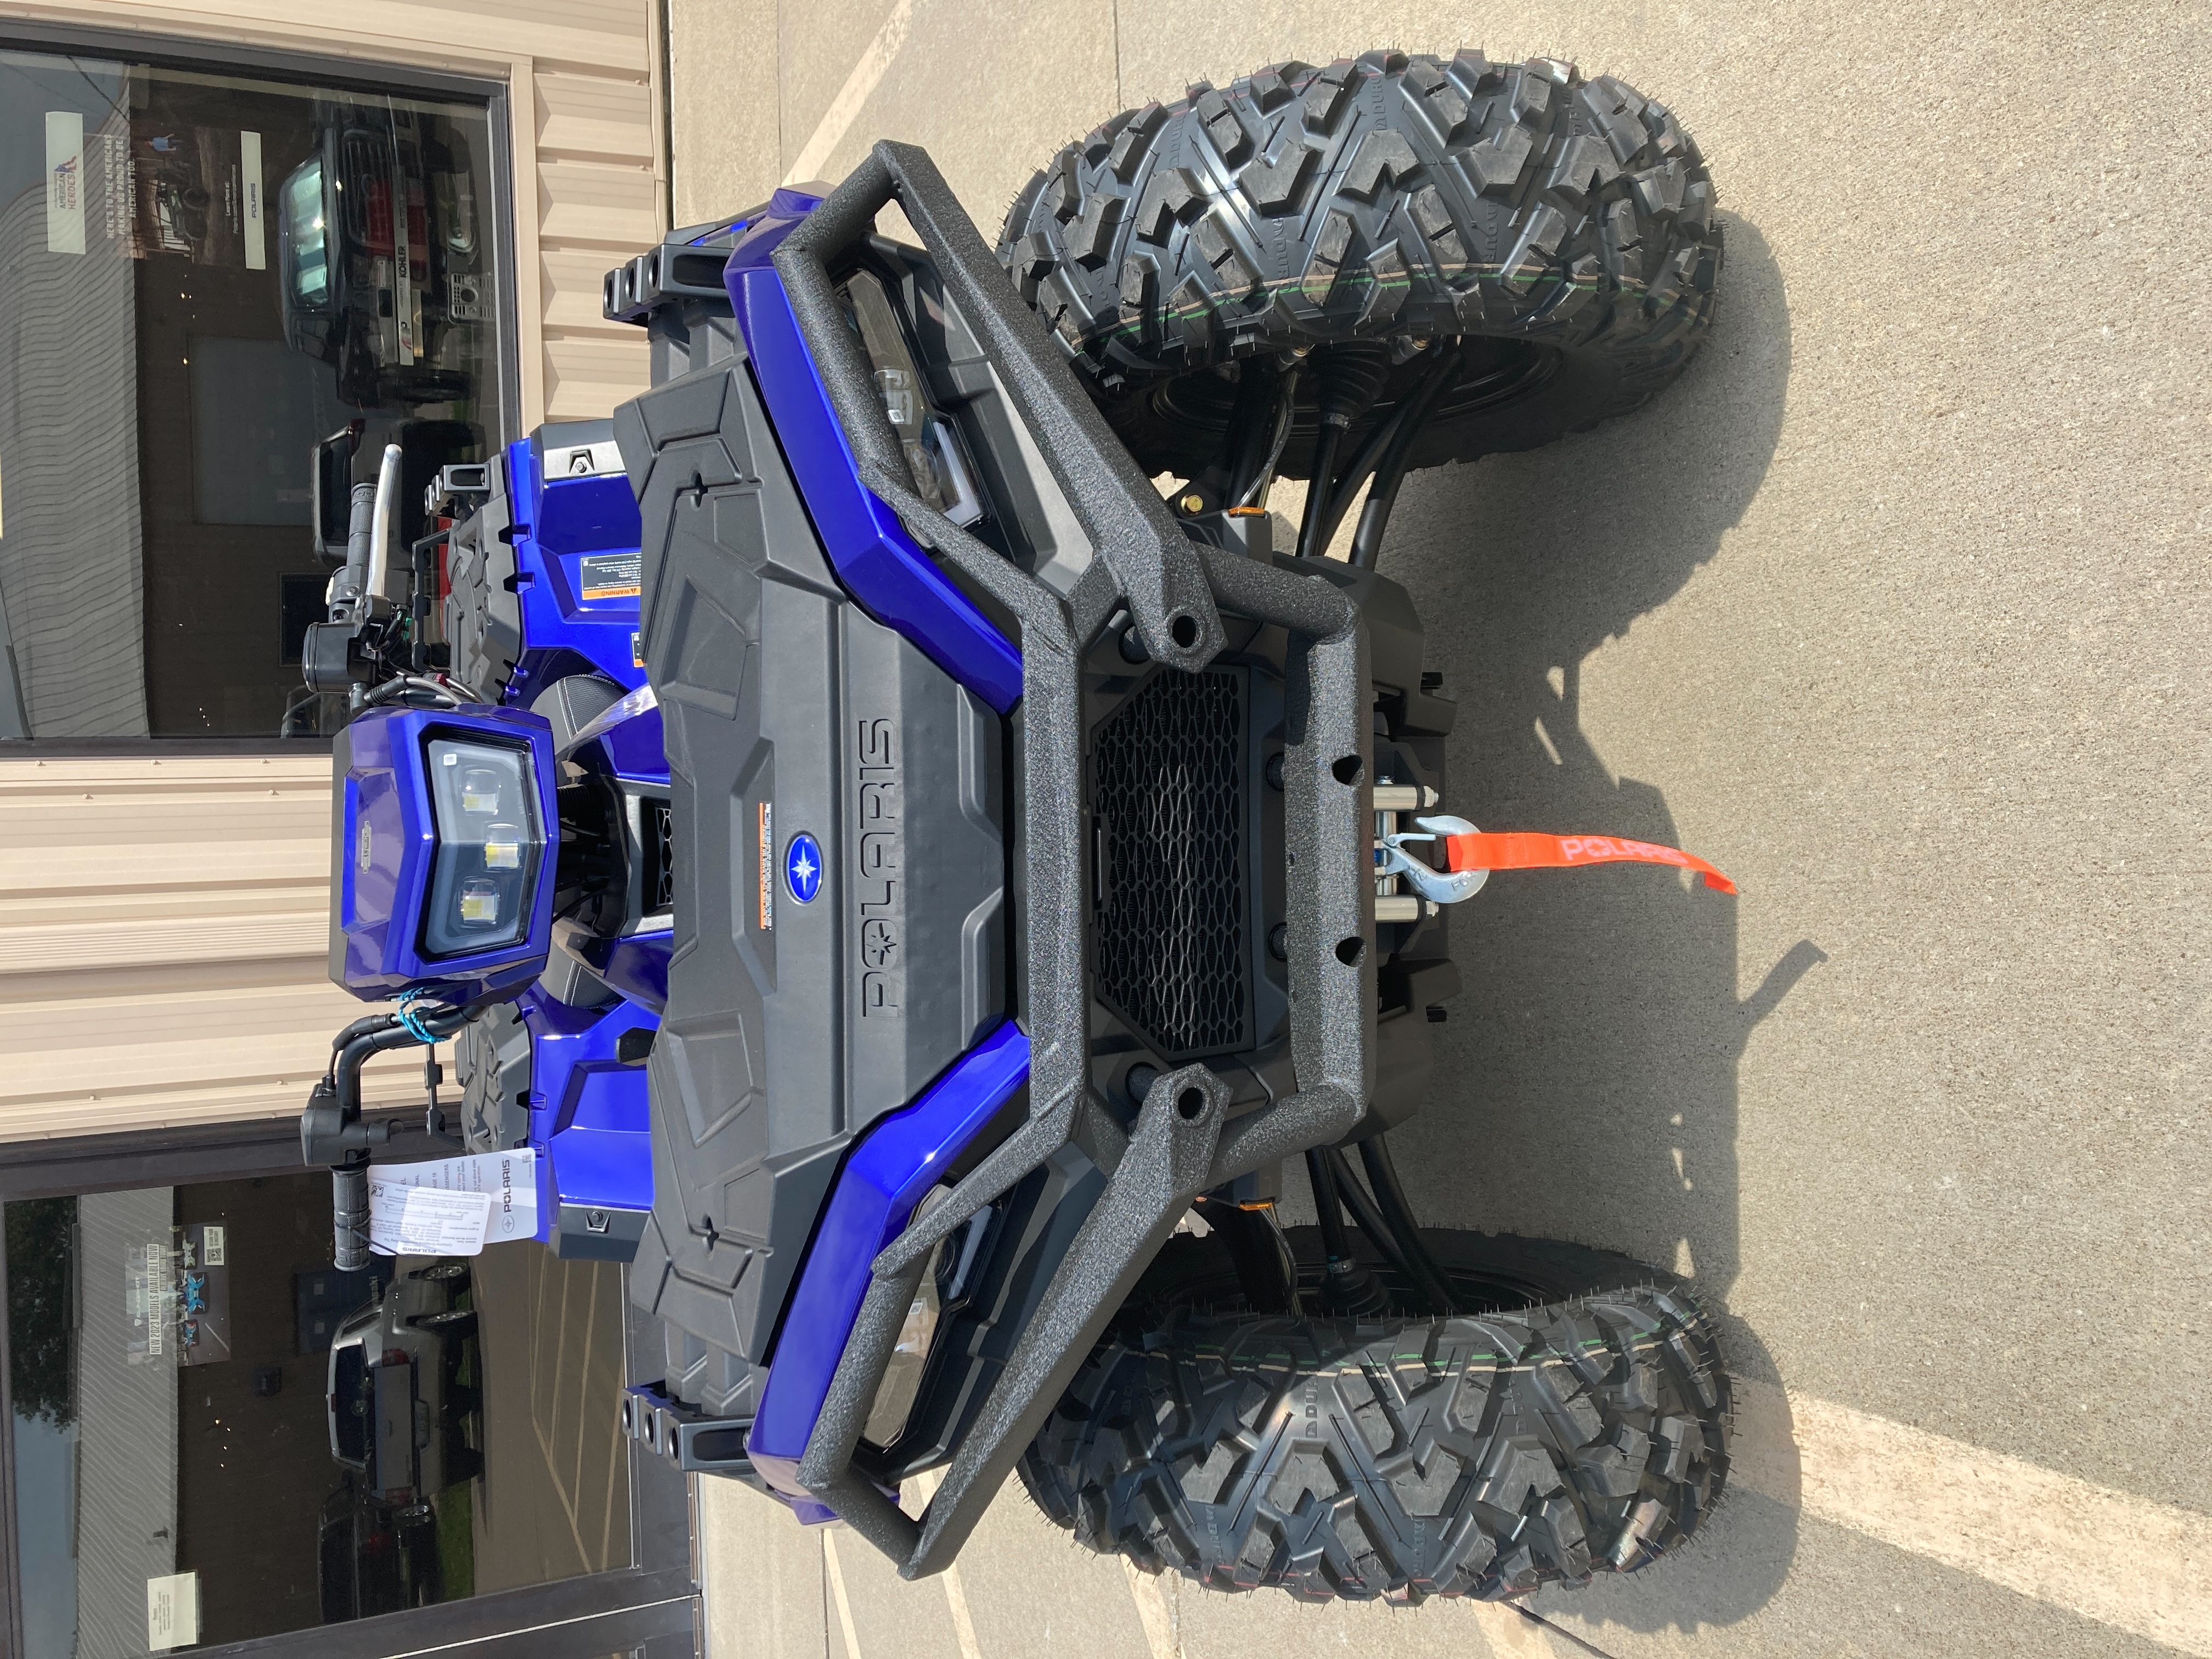 2024 Polaris Sportsman 850 Ultimate Trail at Brenny's Motorcycle Clinic, Bettendorf, IA 52722